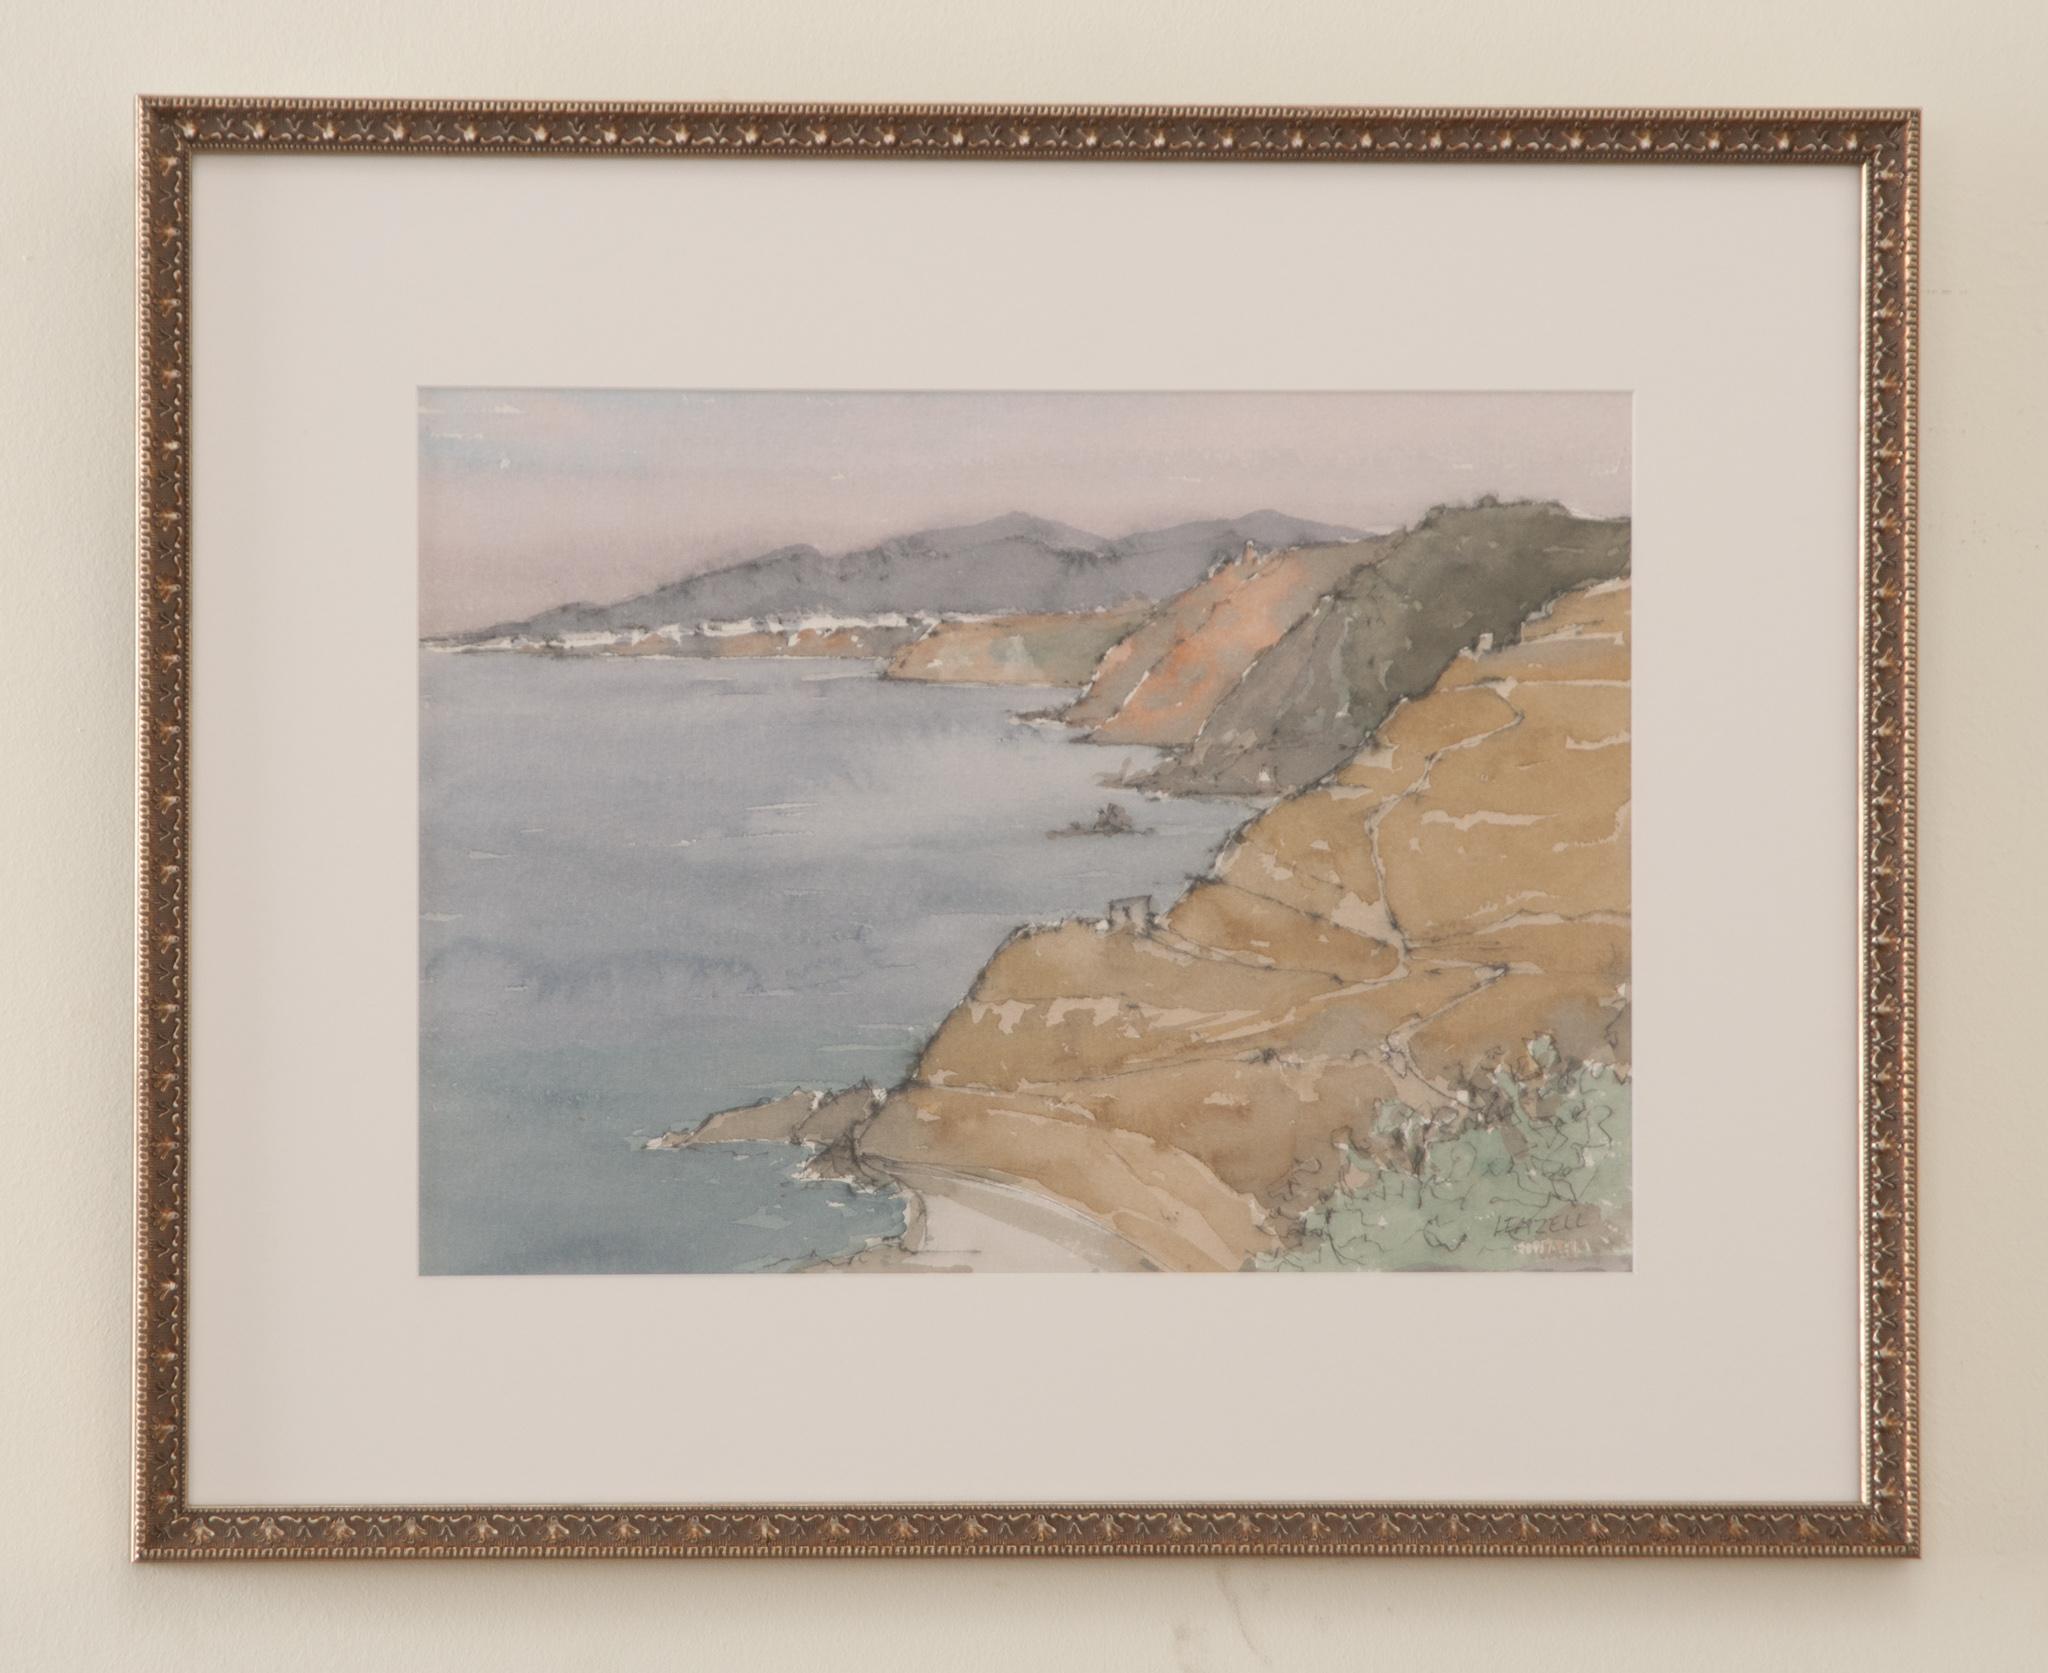 A lovely coastal landscape watercolor by painter Eric Leazell, signed by the artist. Eric “Lee” Leazell was a 20th century British artist born in 1933. He had a highly prolific career painting in oils and watercolor. His paintings are in private